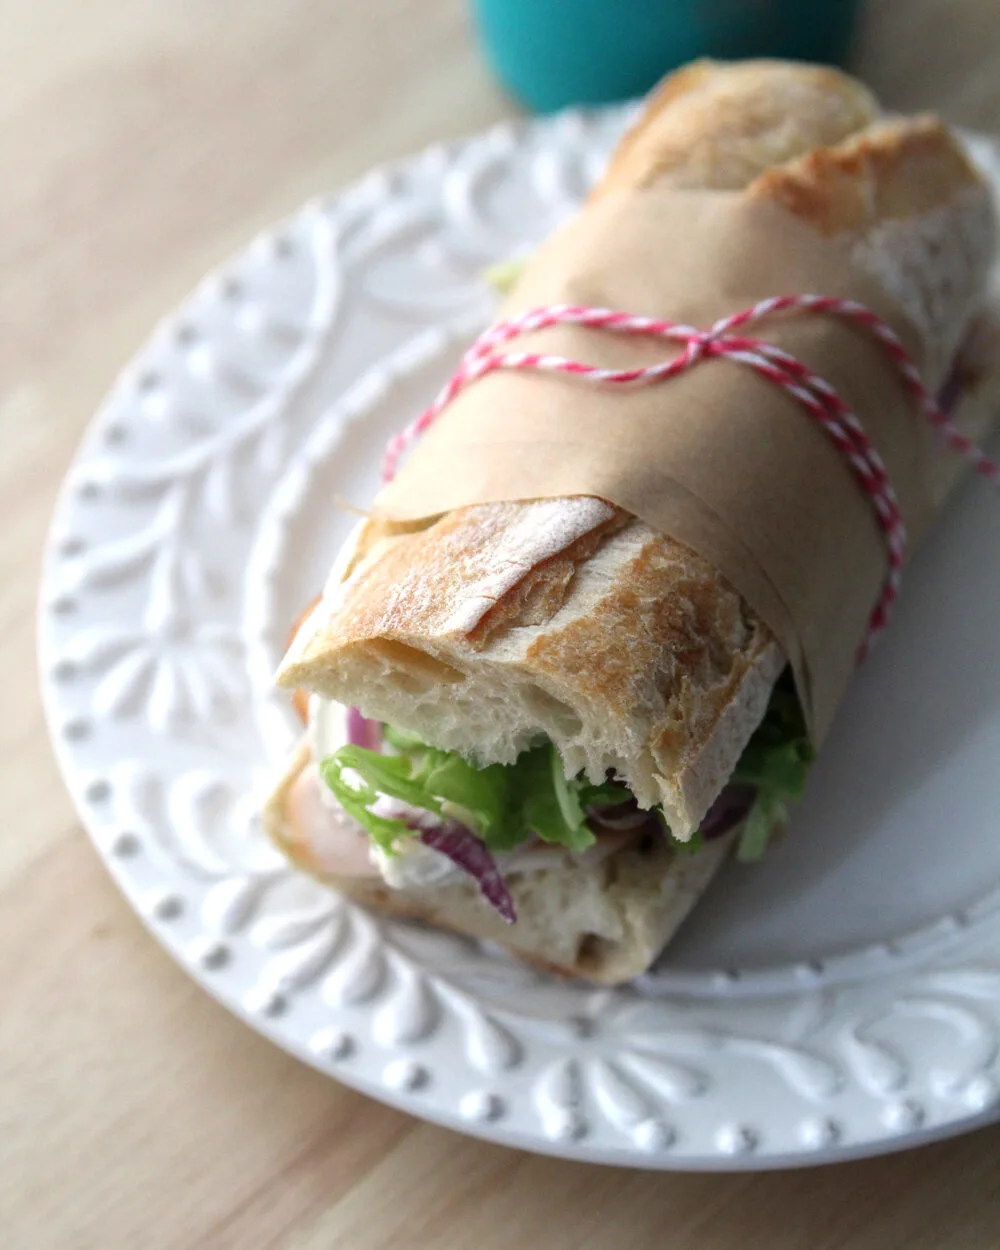 A sandwich on a baguette is shown with visible green lettuce, red onion and a bit of brie. It's sitting on a white plate and is wrapped in brown parchment paper with pink and white bakery string.